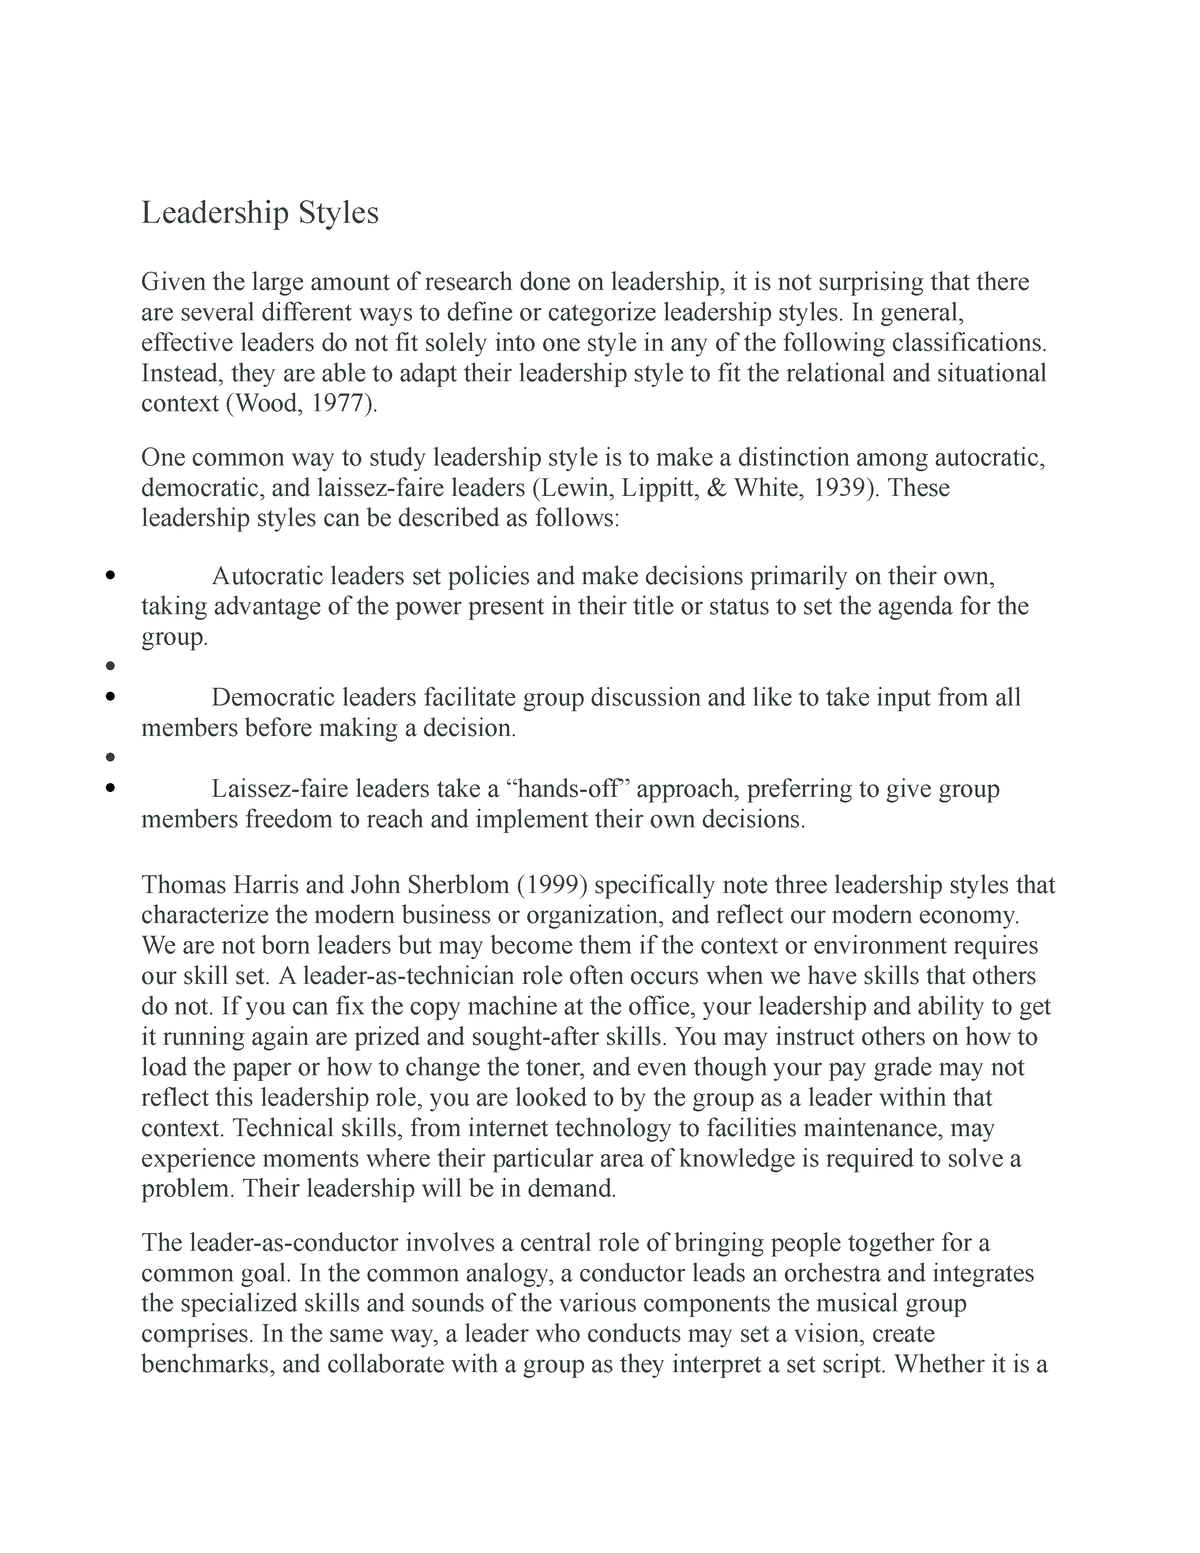 leadership styles in management research paper